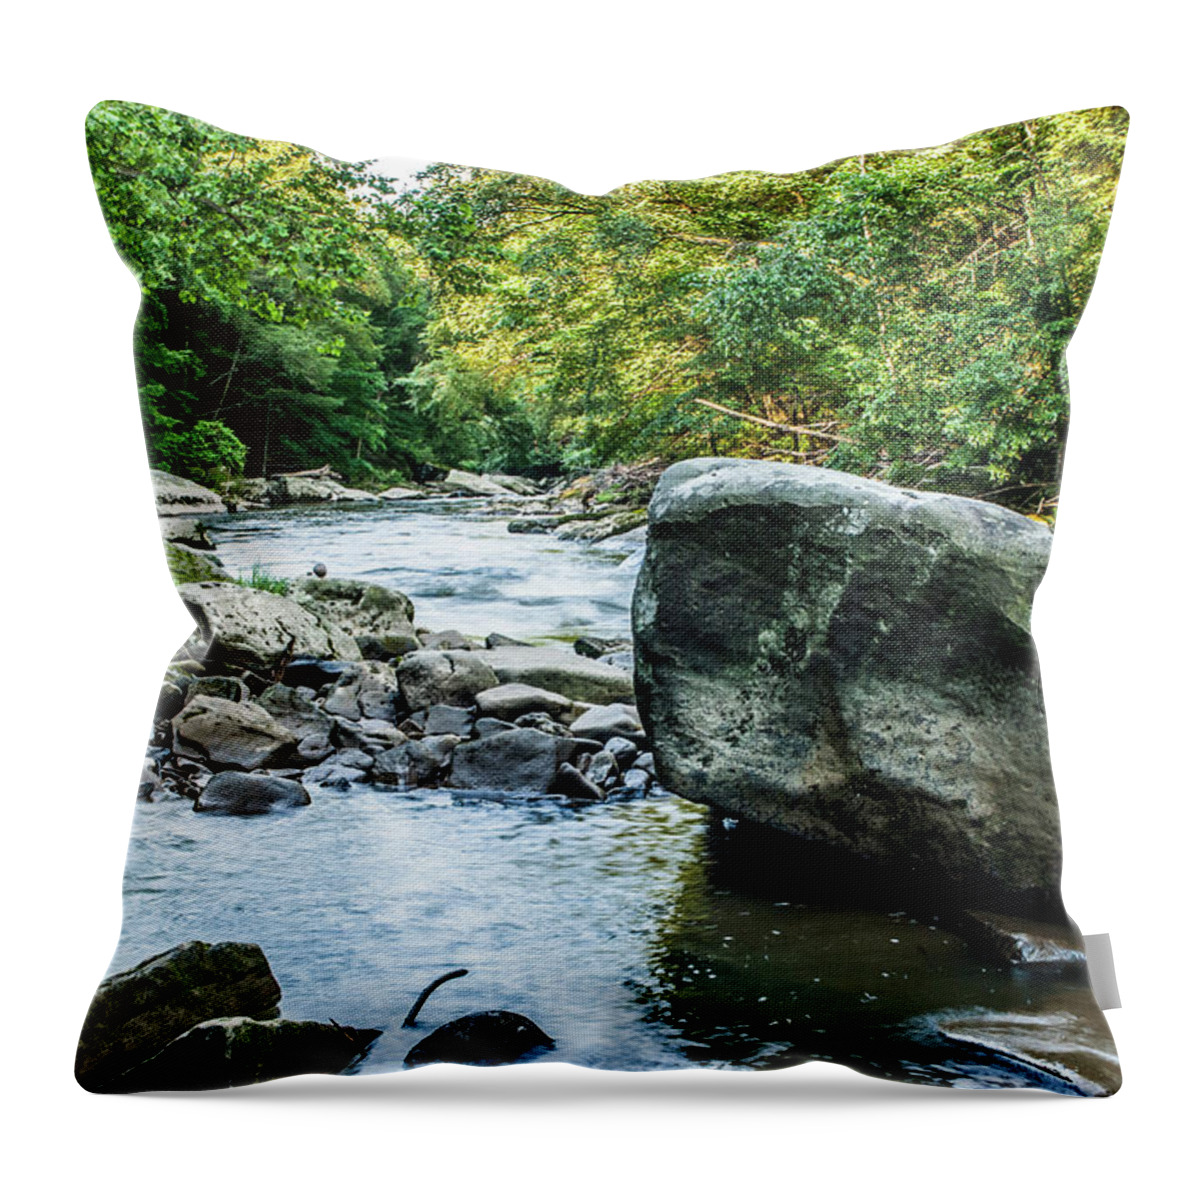 Water Throw Pillow featuring the photograph Slippery Rock Gorge - 1918 by Gordon Sarti